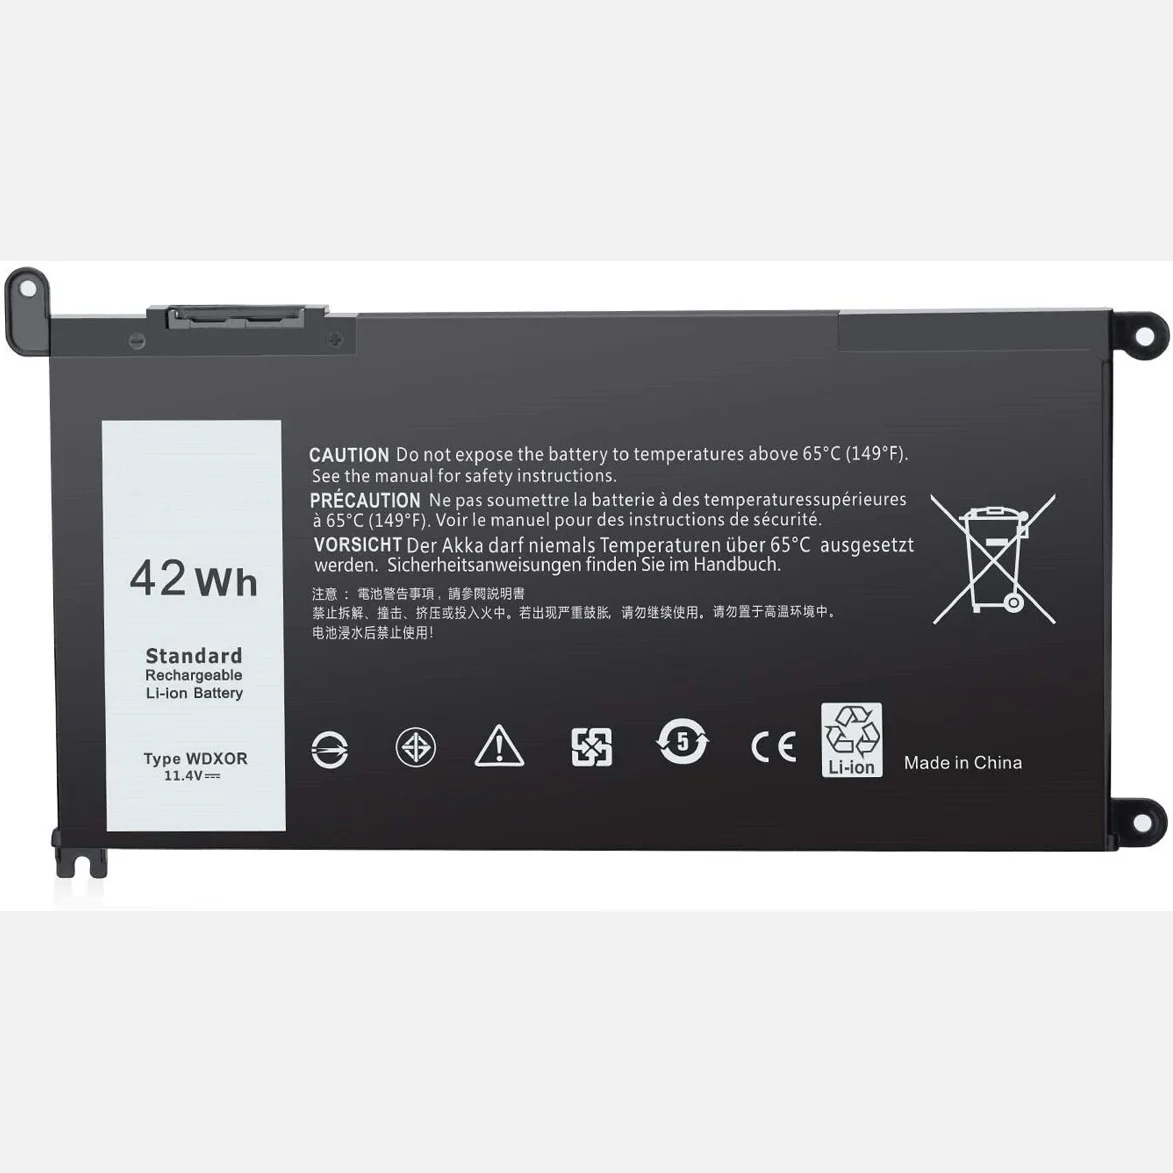 

WDXOR FC92N Battery for Dell Inspiron 15 5000 7000 5565 5567 5568 5570 5578 5579 7560 7569 7570 7573 Lithium Ion Laptop Battery